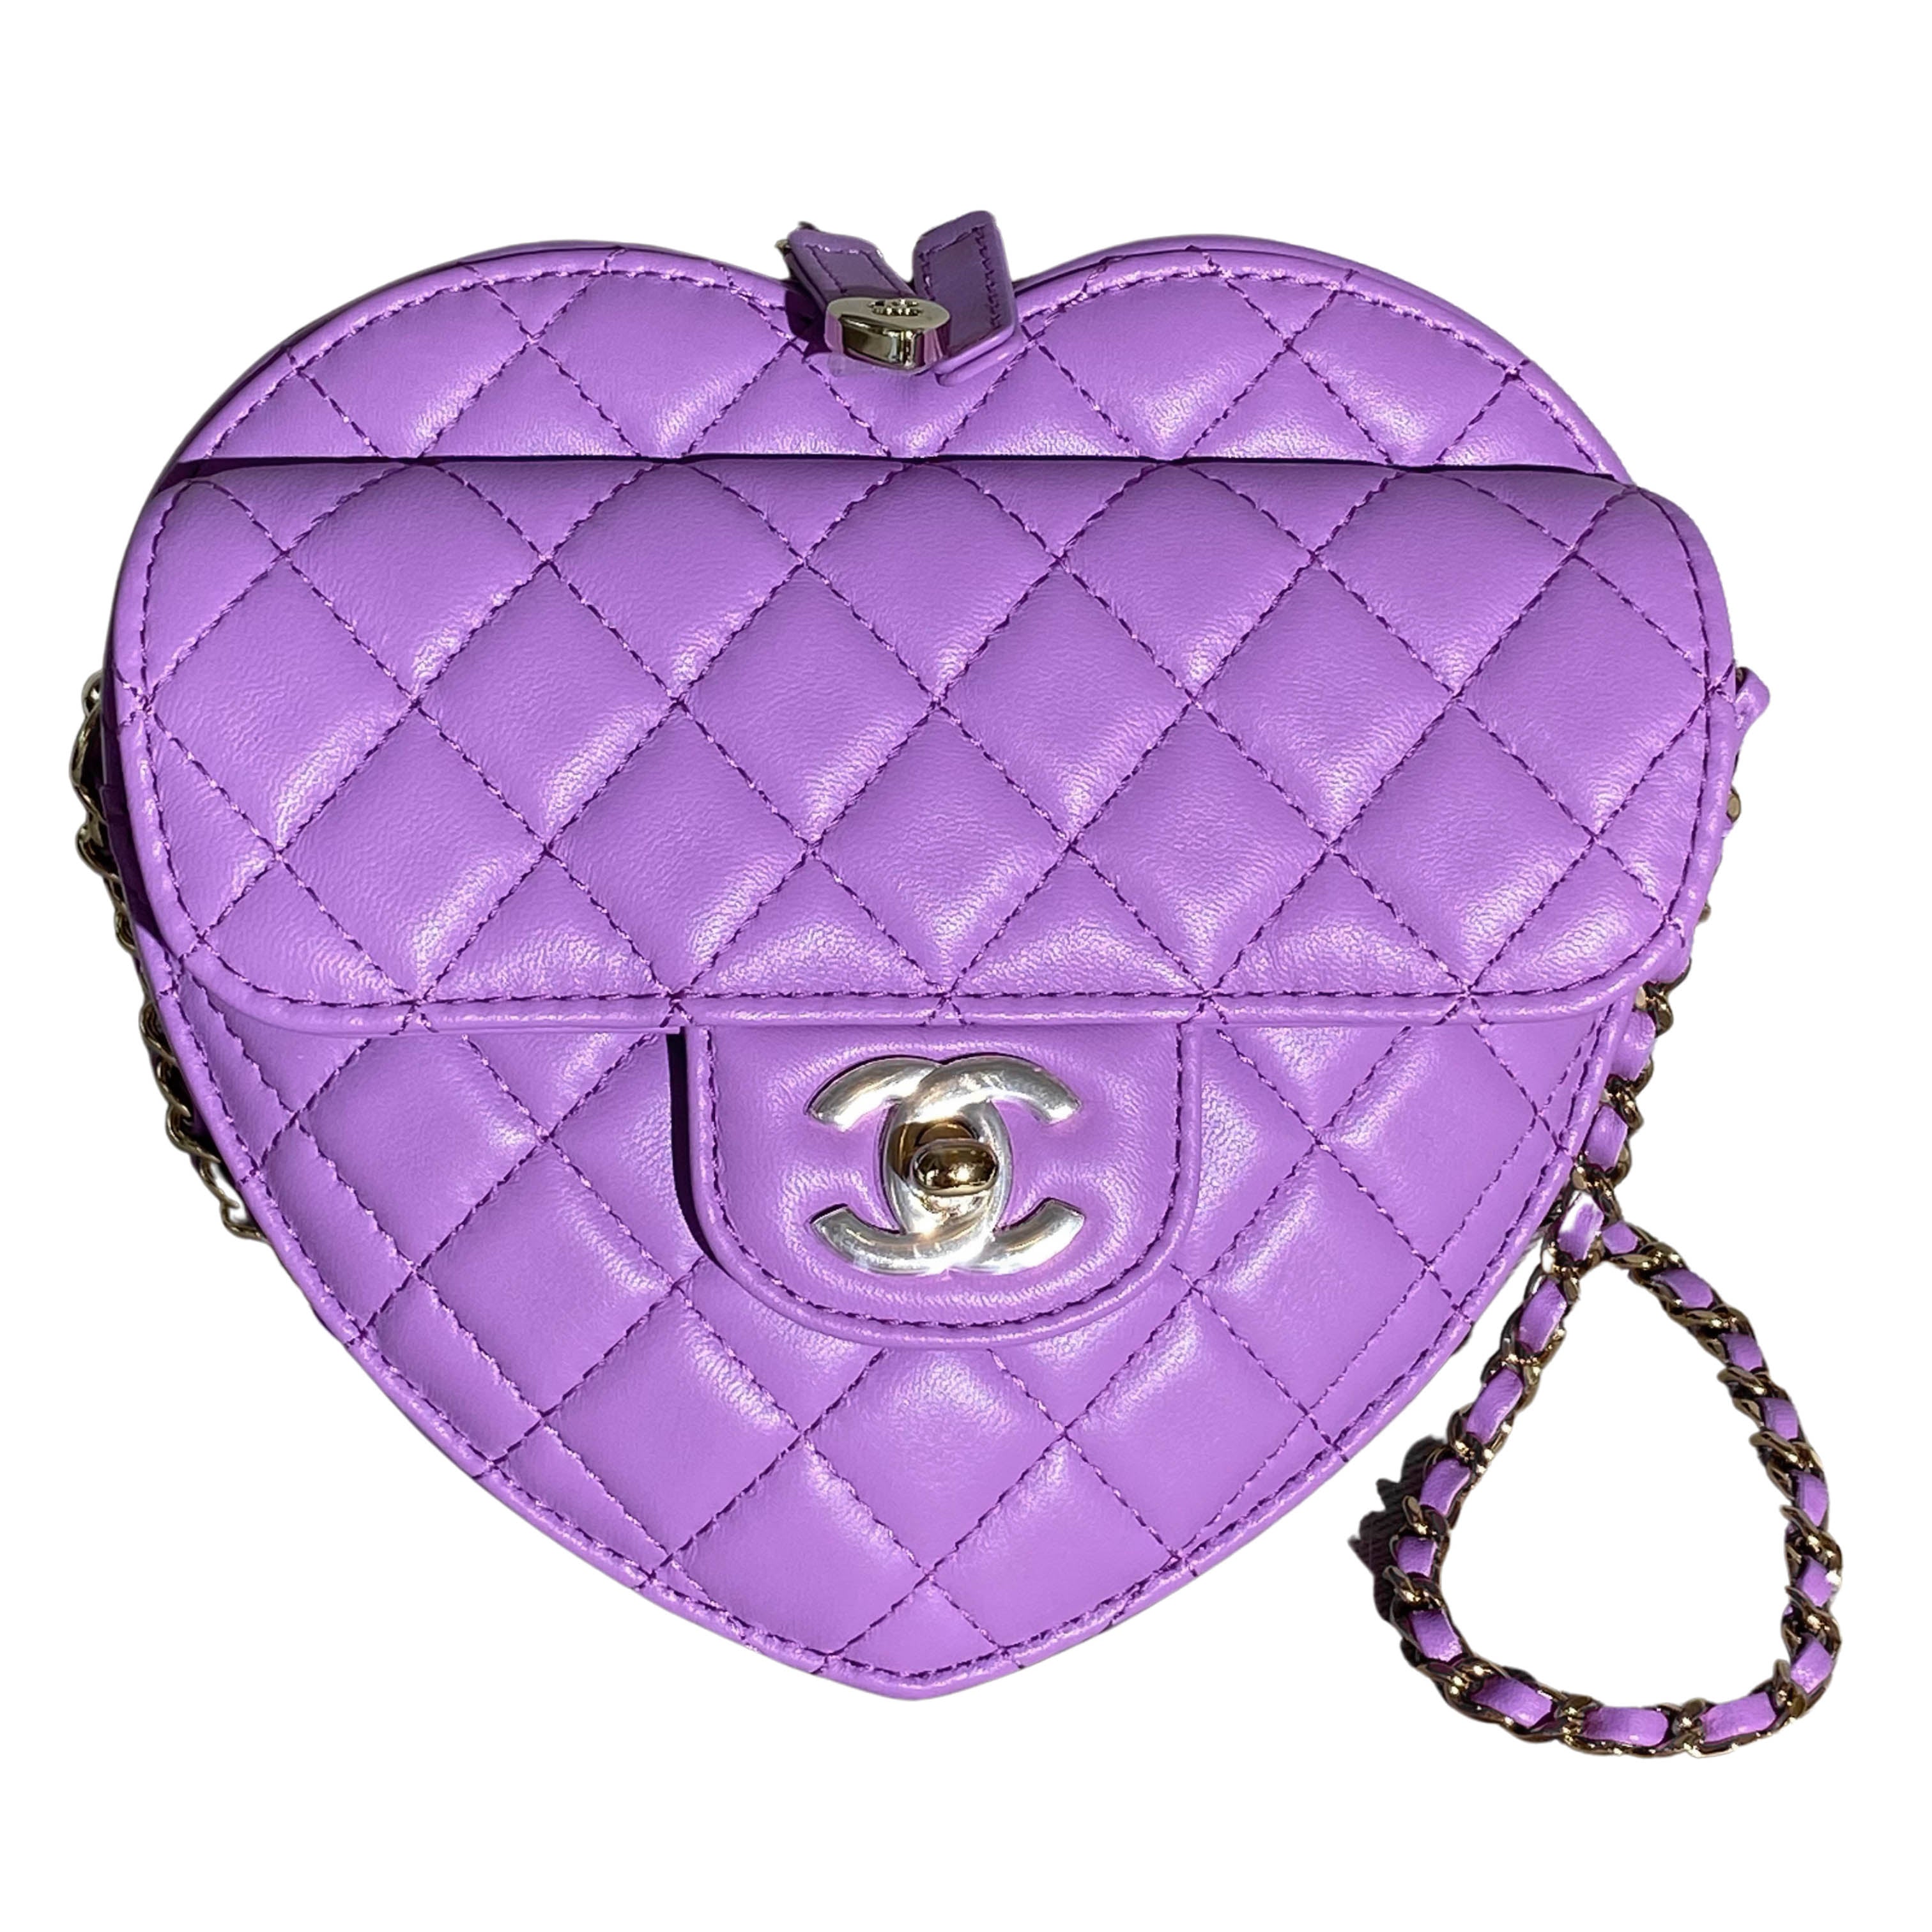 22S CC In Love Blue Lambskin Quilted Large Heart Bag Light Gold Hardware